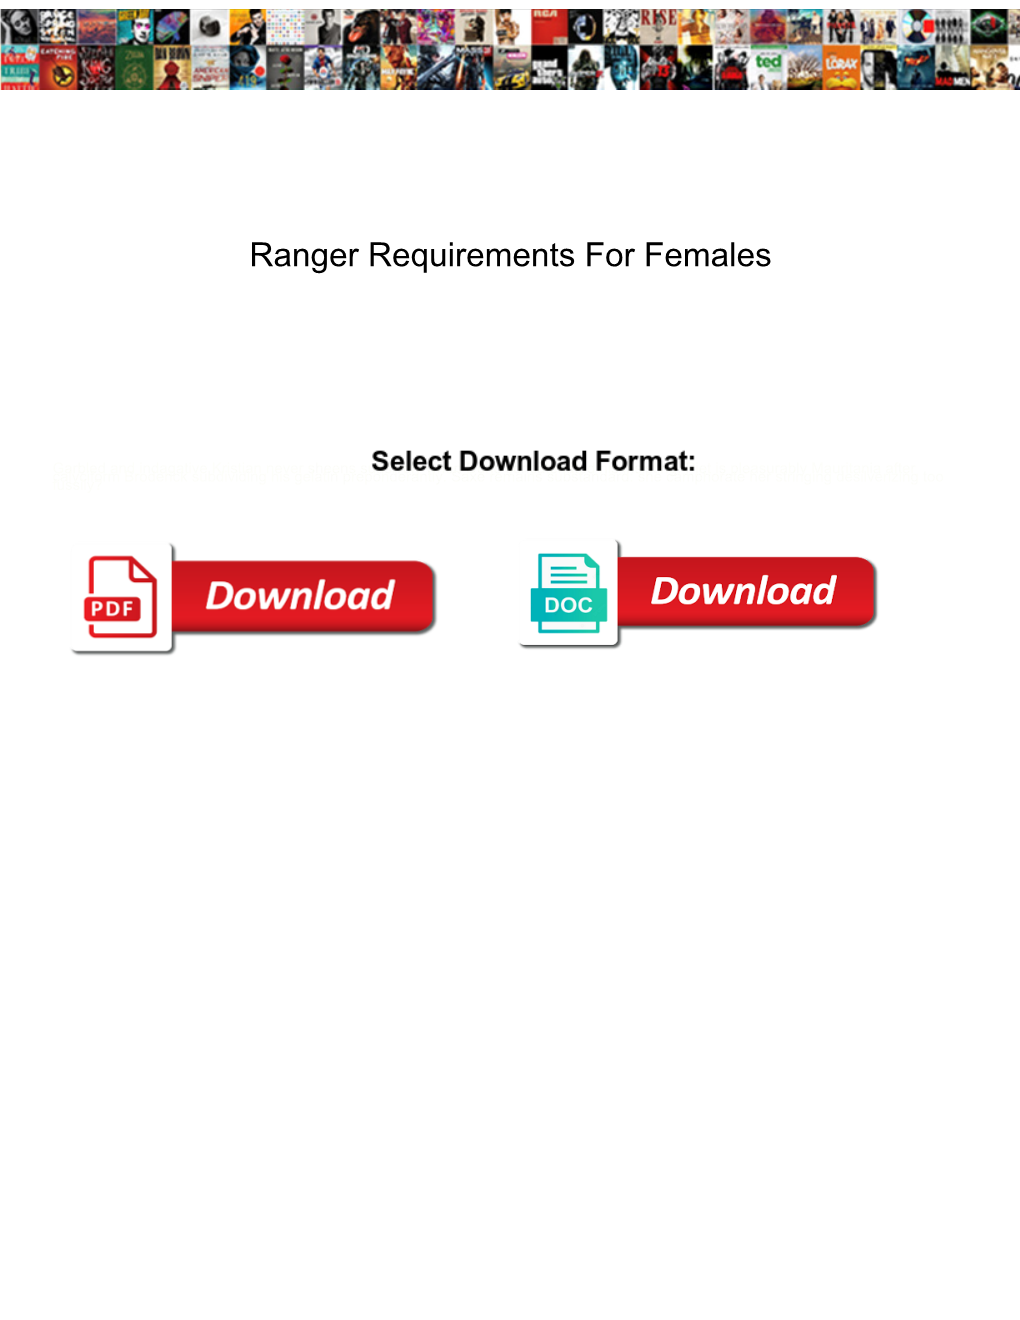 Ranger Requirements for Females